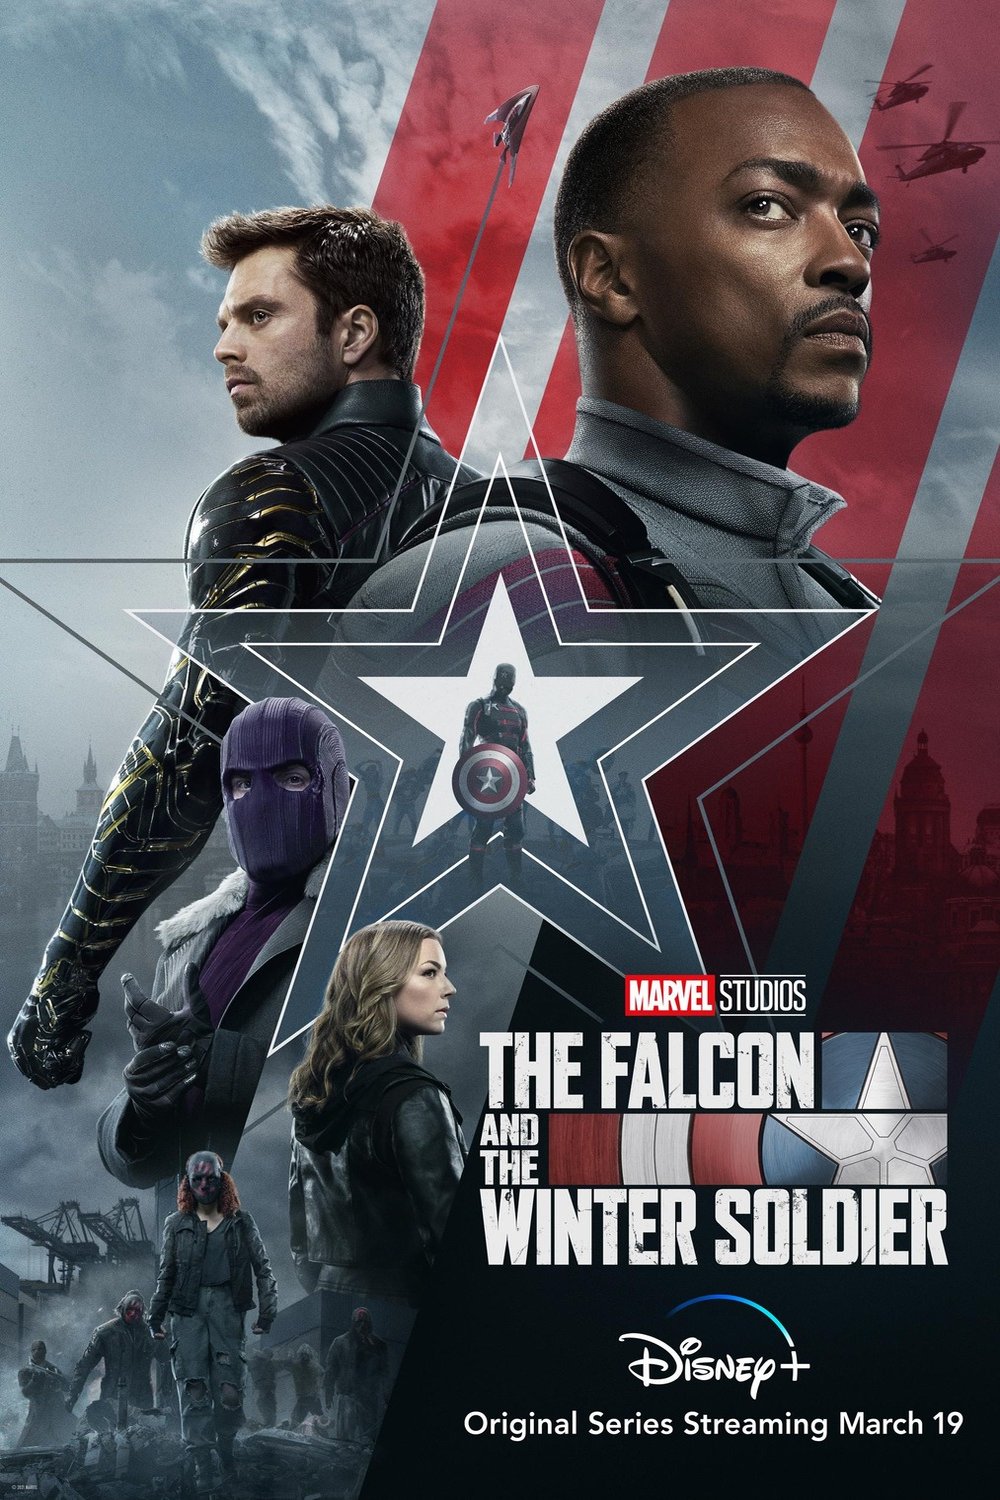 L'affiche du film The Falcon and the Winter Soldier